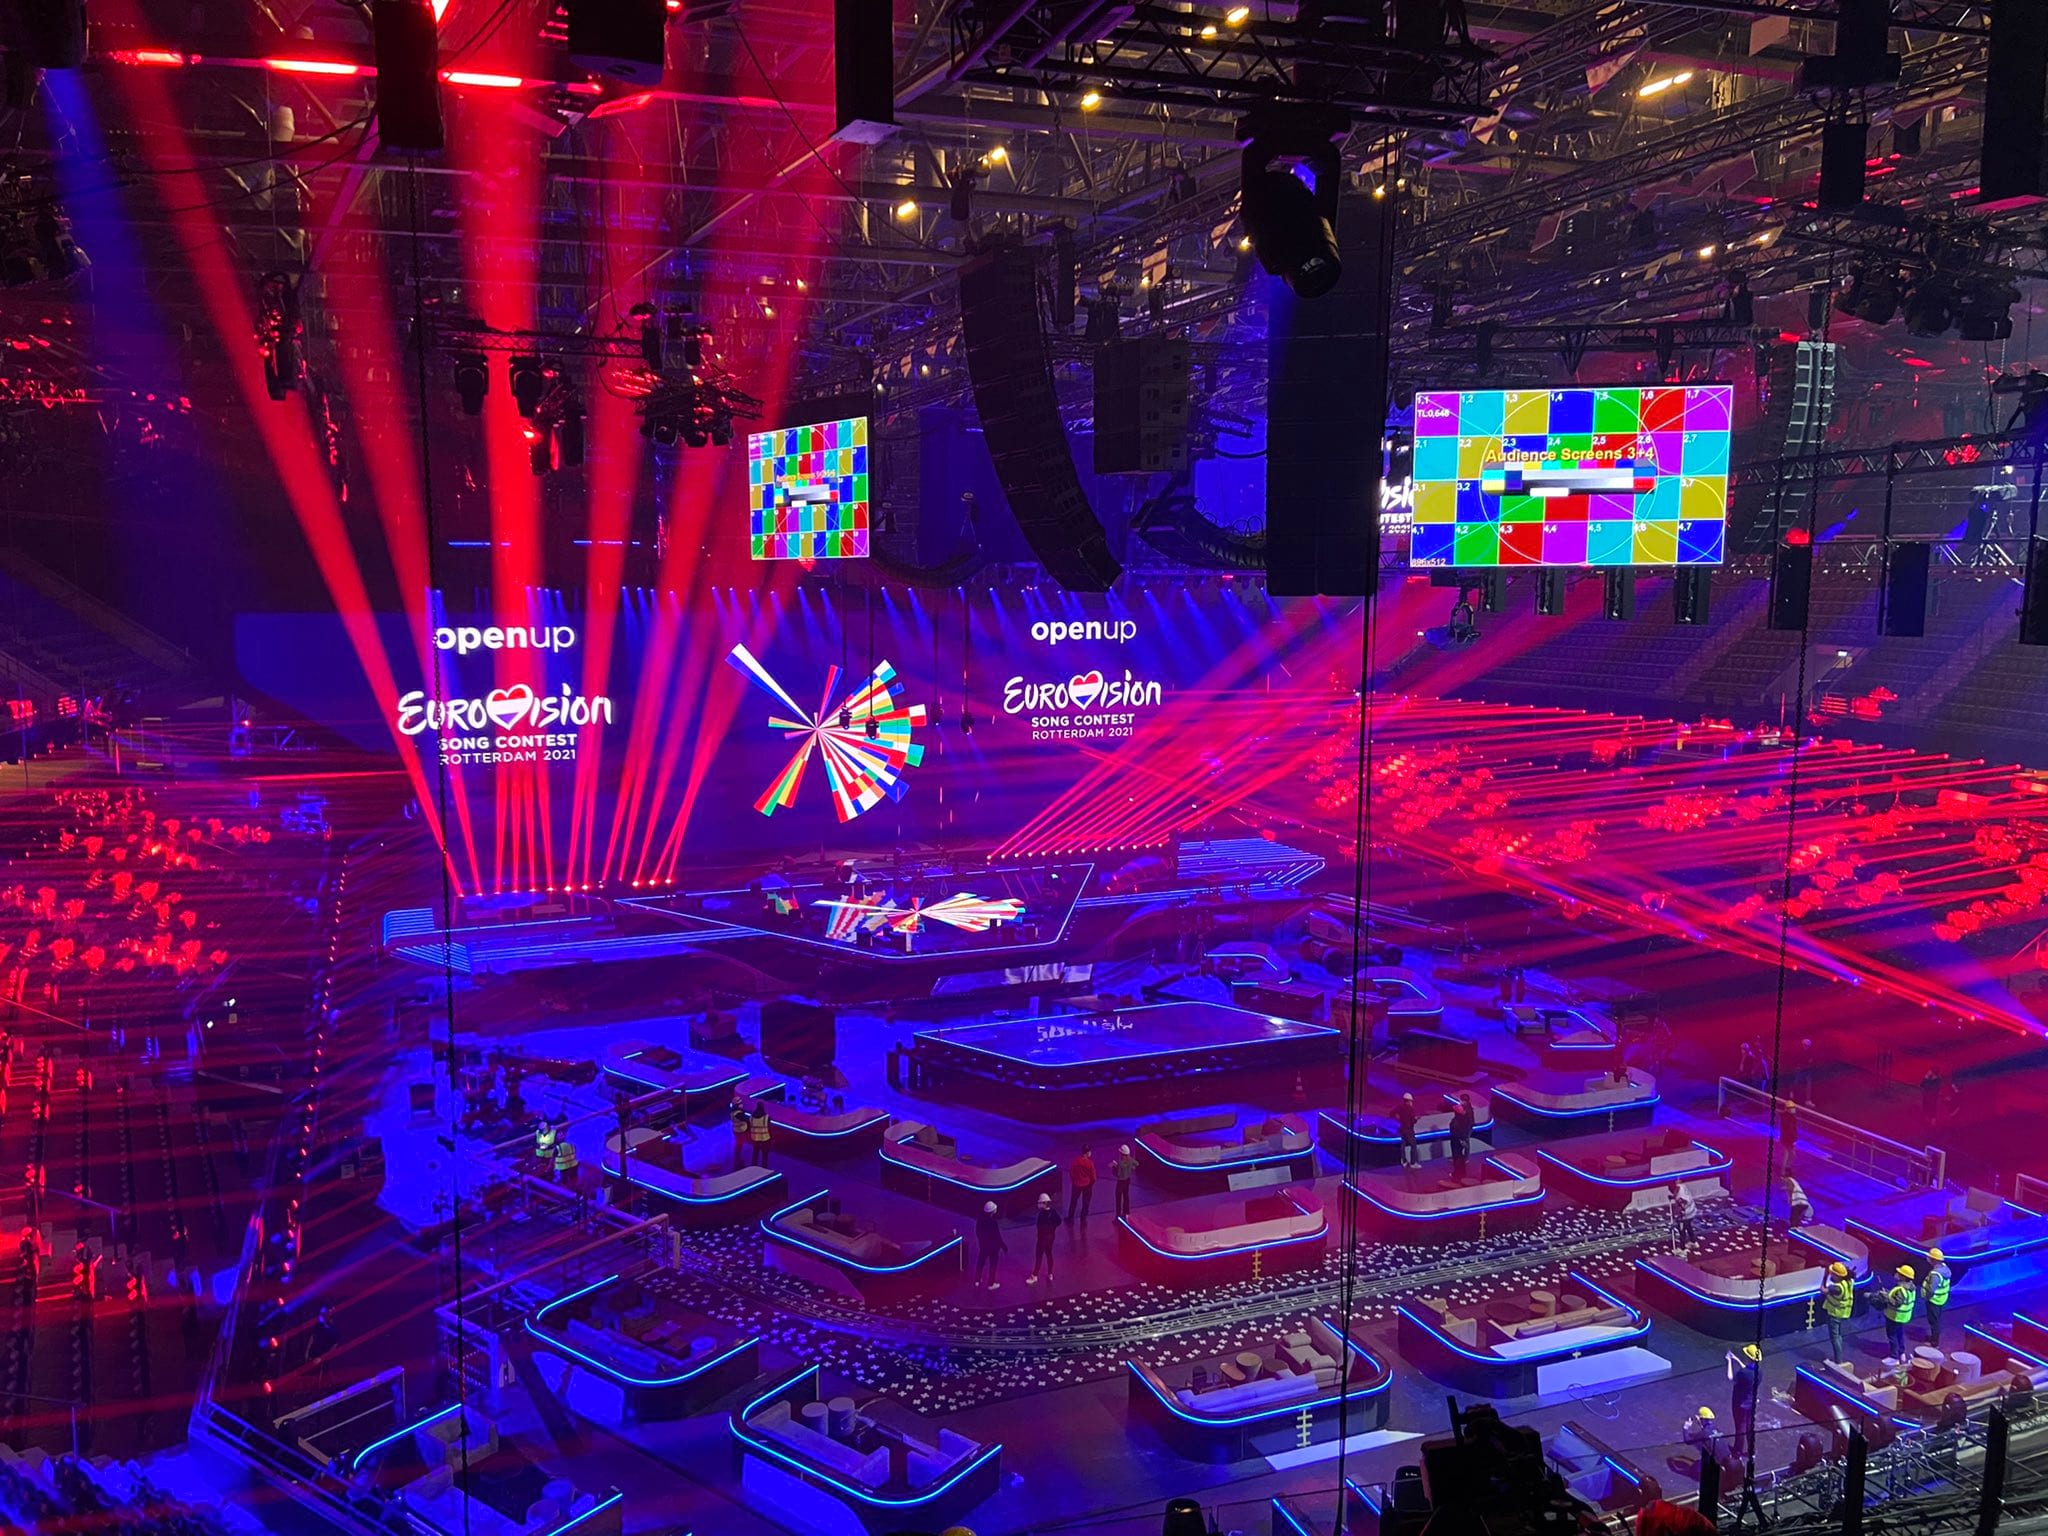 Eurovision 2021: First image of the impressive stage in Rotterdam Ahoy